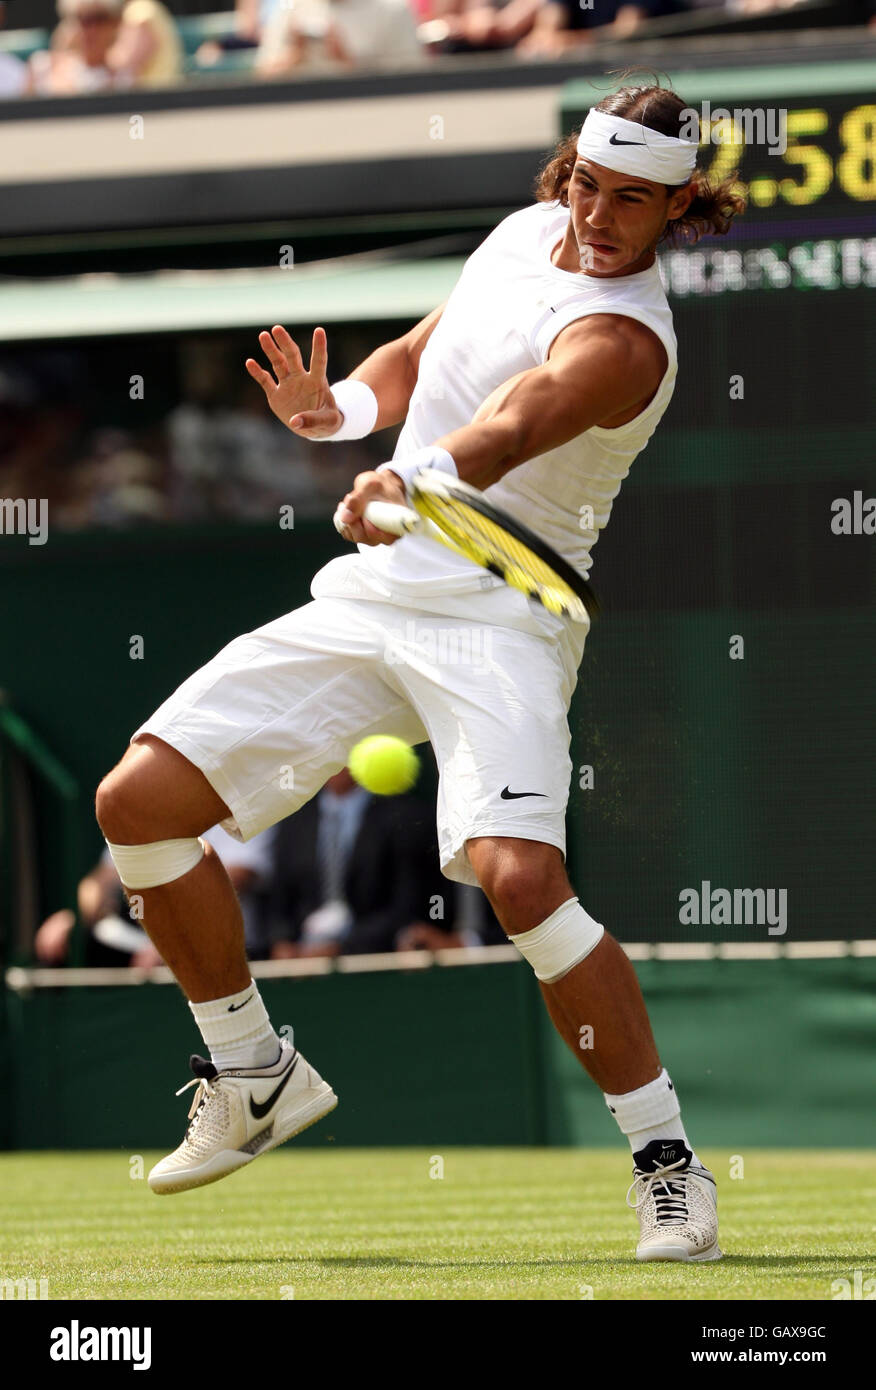 Spain's Rafael Nadal during the Wimbledon Championships 2008 at the All England Tennis Club in Wimbledon. Stock Photo